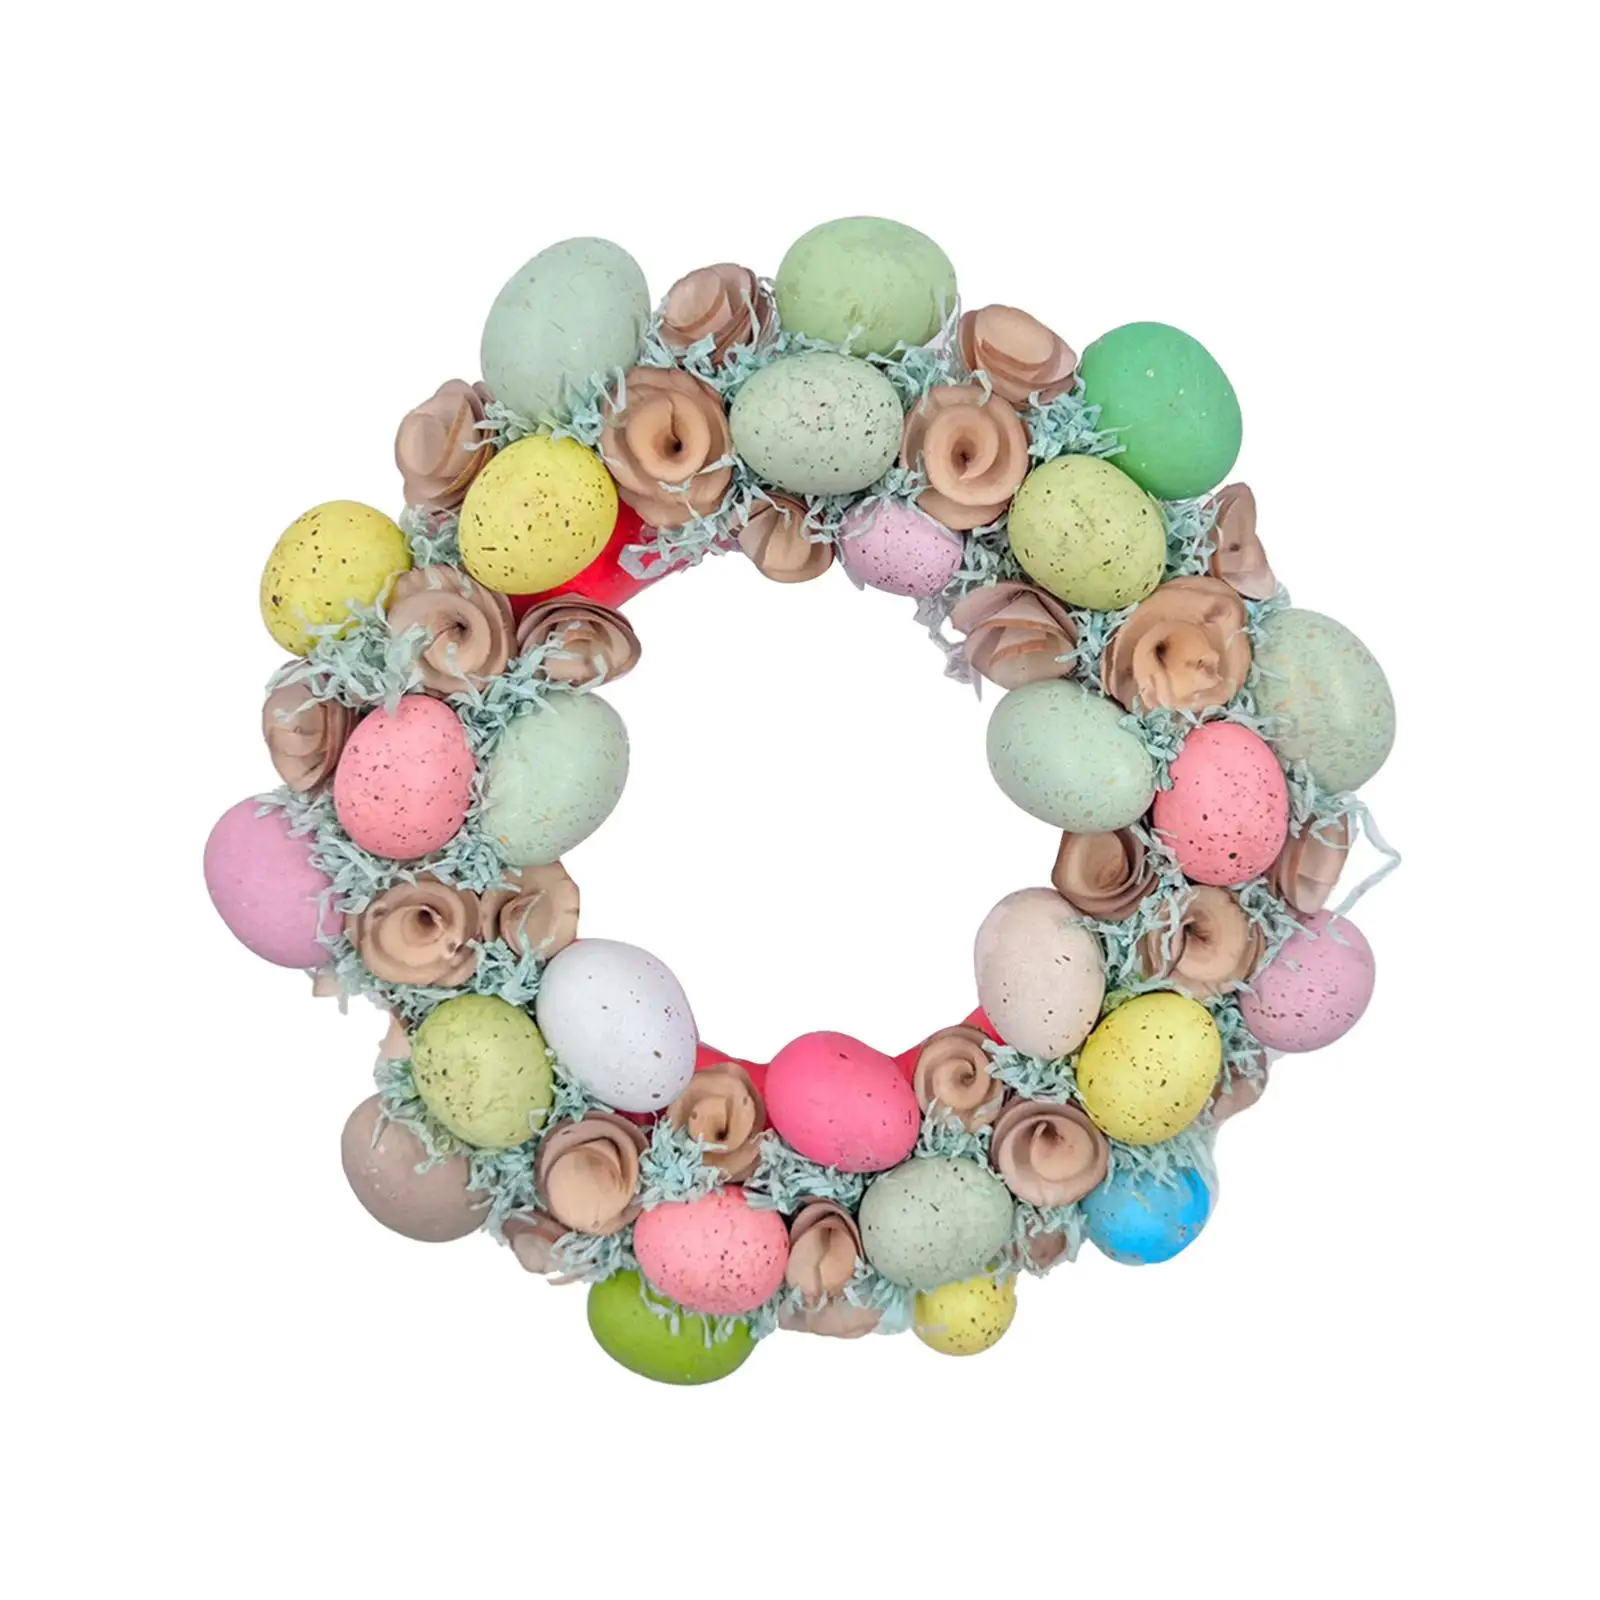 16inch Colorful Easter Egg Wreath Decoration Easter Party Supplies for Farmhouse Home Decor Accessory Sturdy Multipurpose